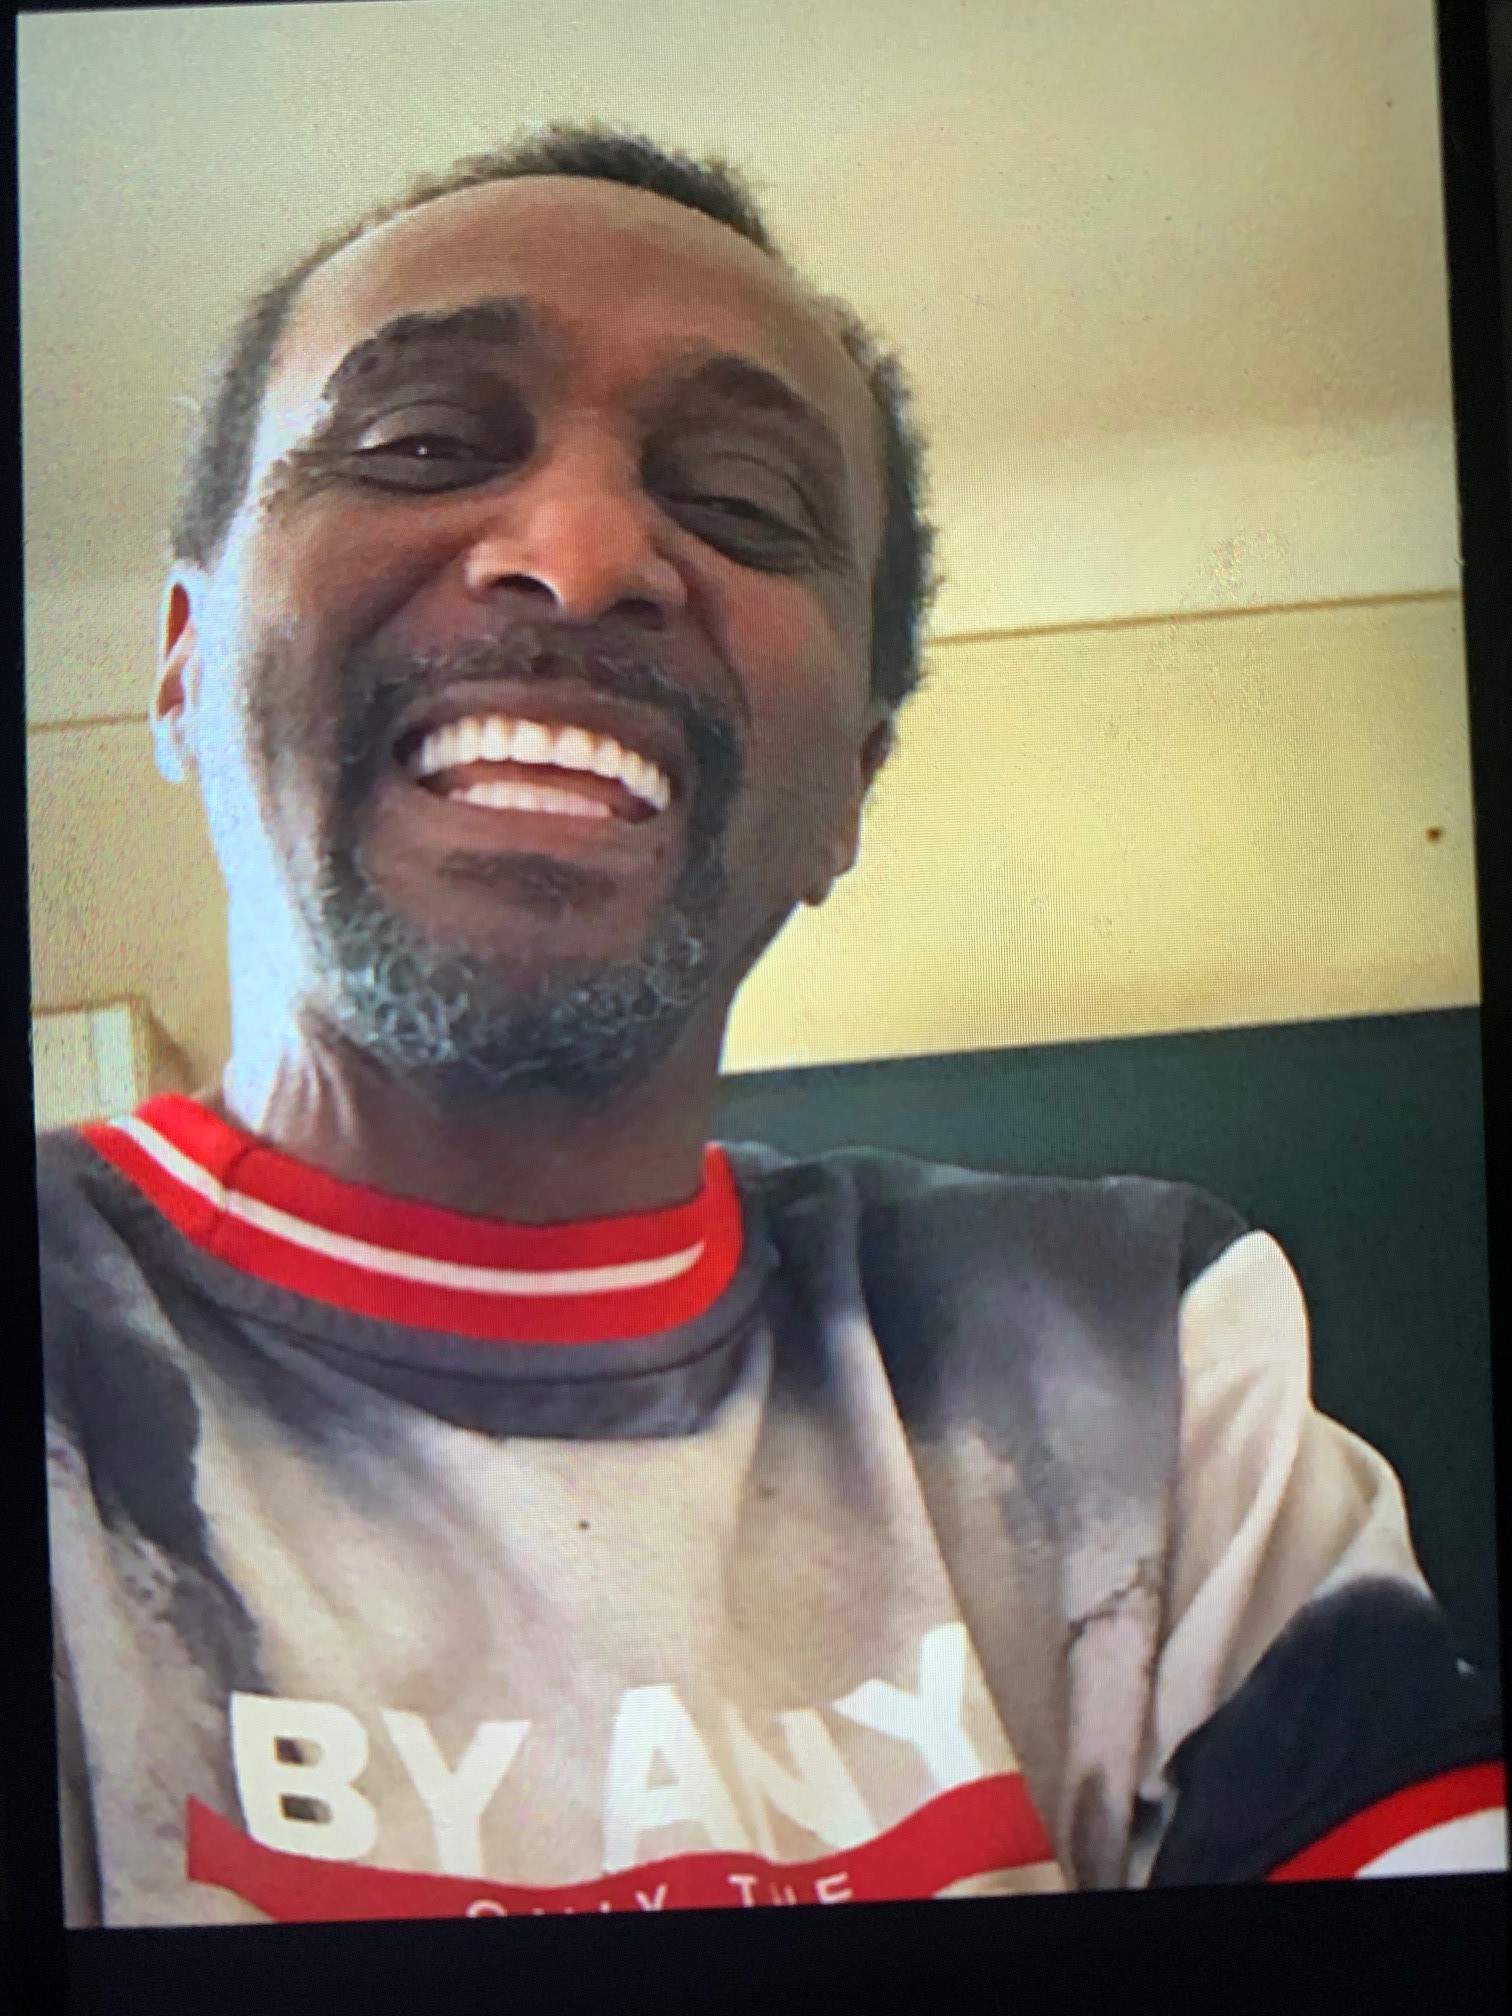 Detroit police looking for missing 66-year-old man who has dementia - WDIV ClickOnDetroit